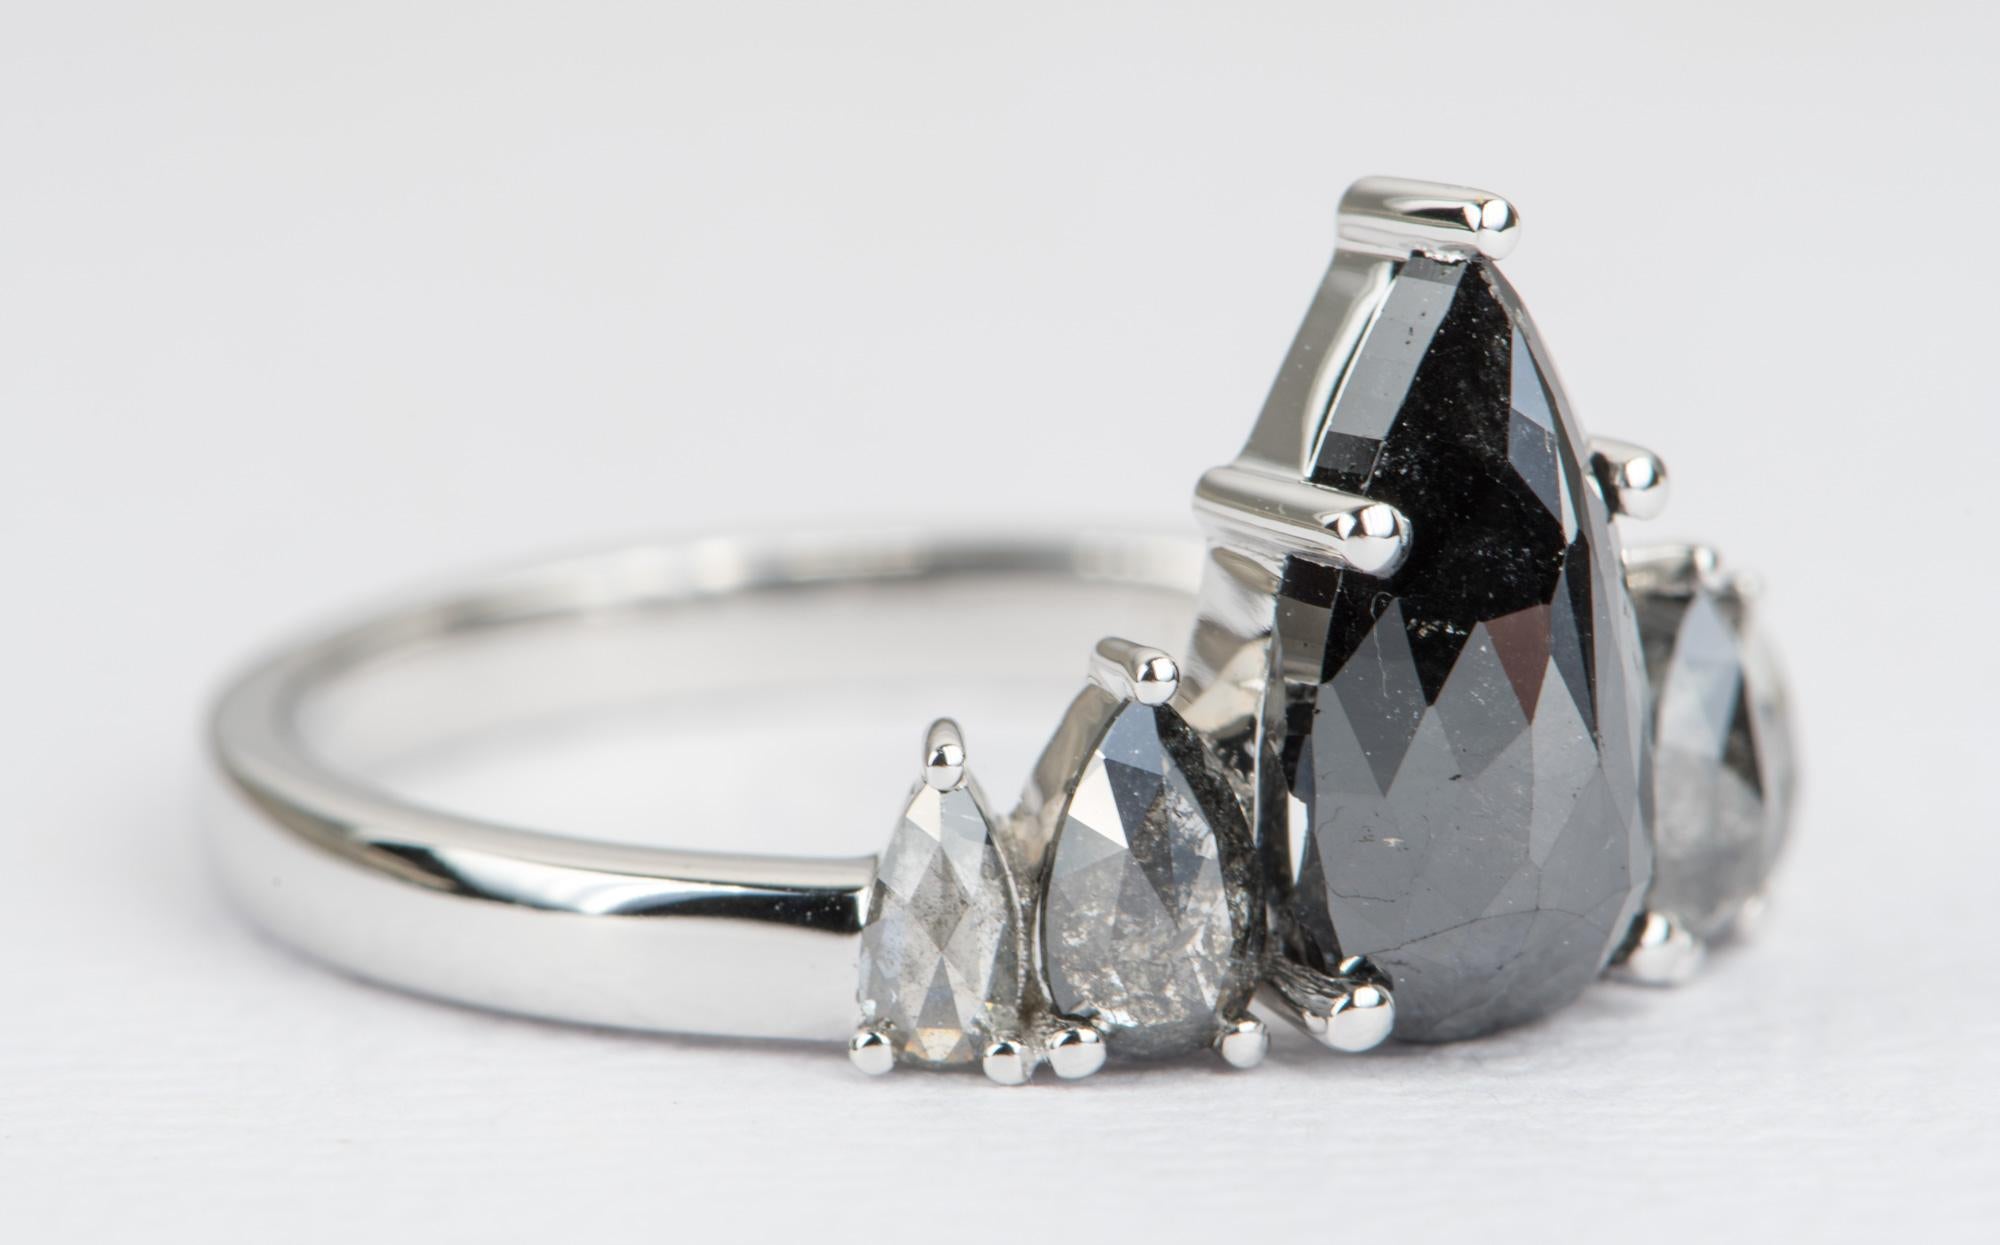 ♥  Solid 14K white gold ring set with a beautiful pear-shaped black salt and pepper diamond center, and complementary salt and pepper diamonds on each side to form a stunning mountain-range look

♥  US Size 7  (Free resizing)
♥  Band width: 2.3mm
♥ 